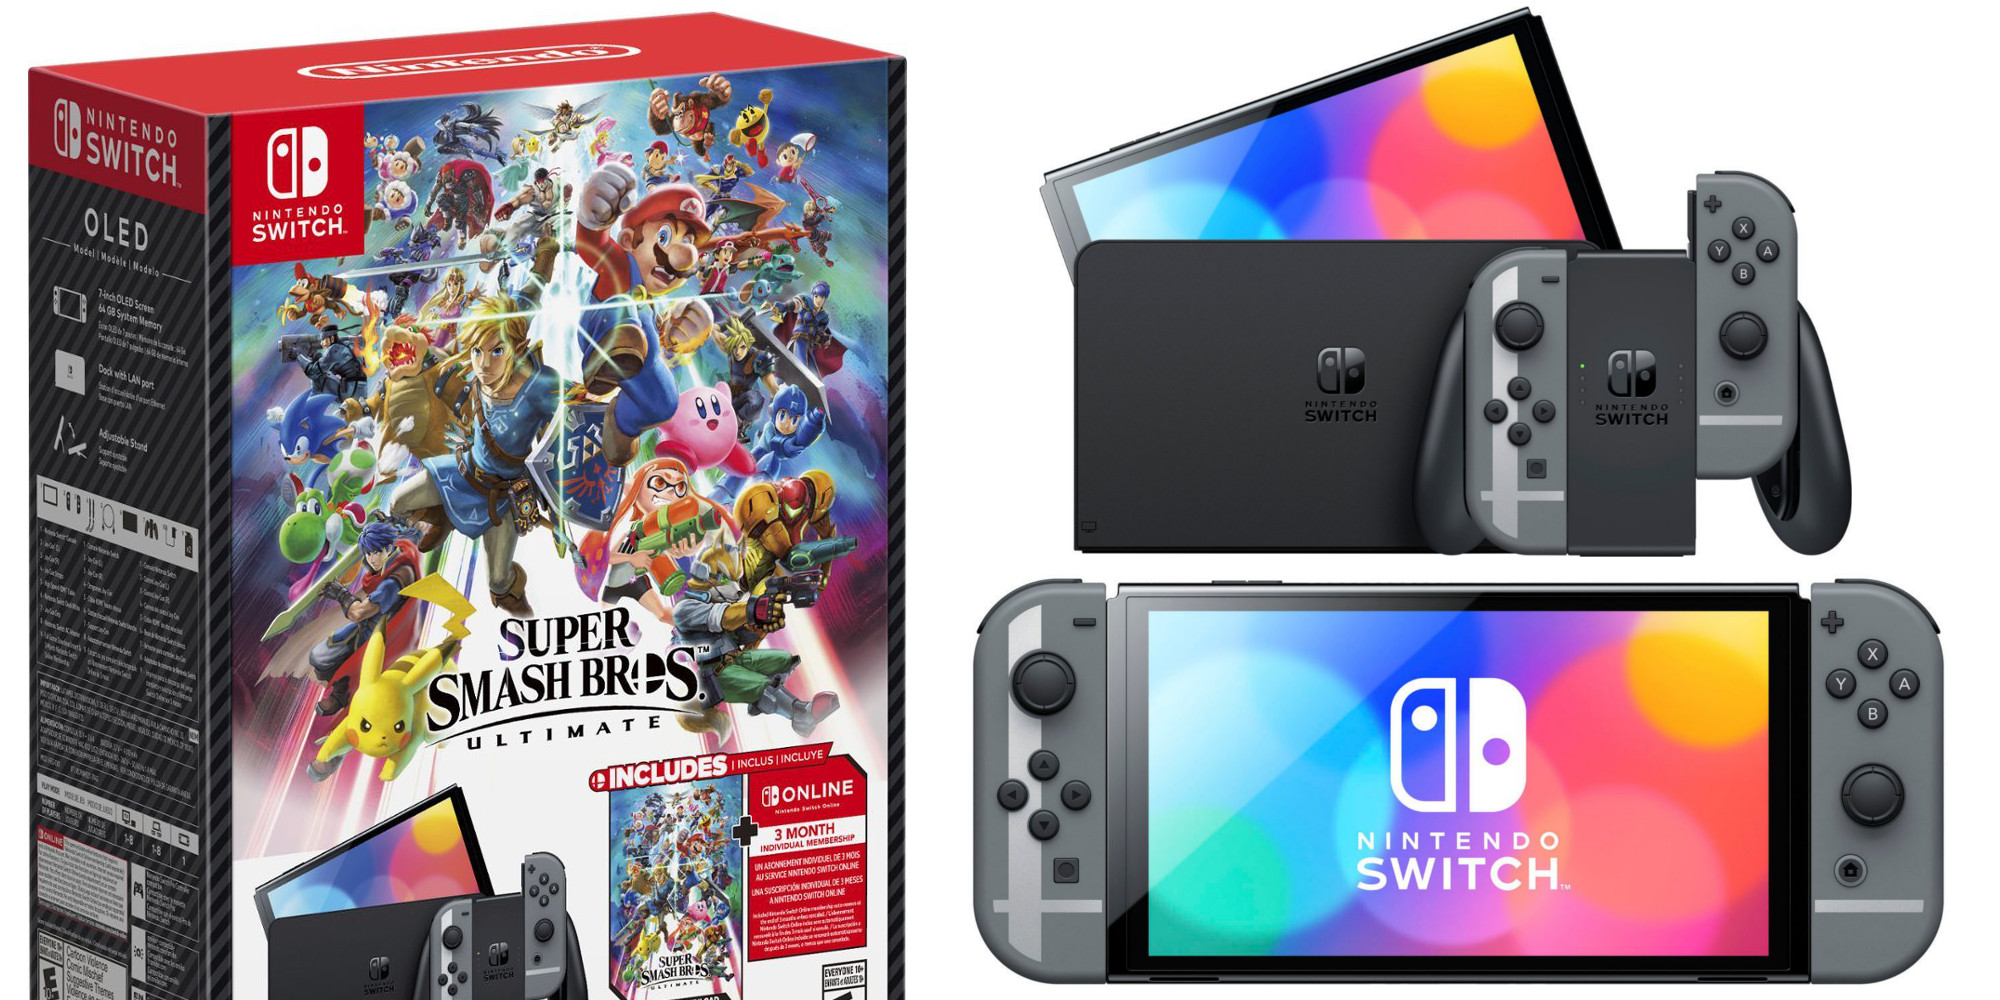 Nintendo Switch Black Friday console deals go live today!